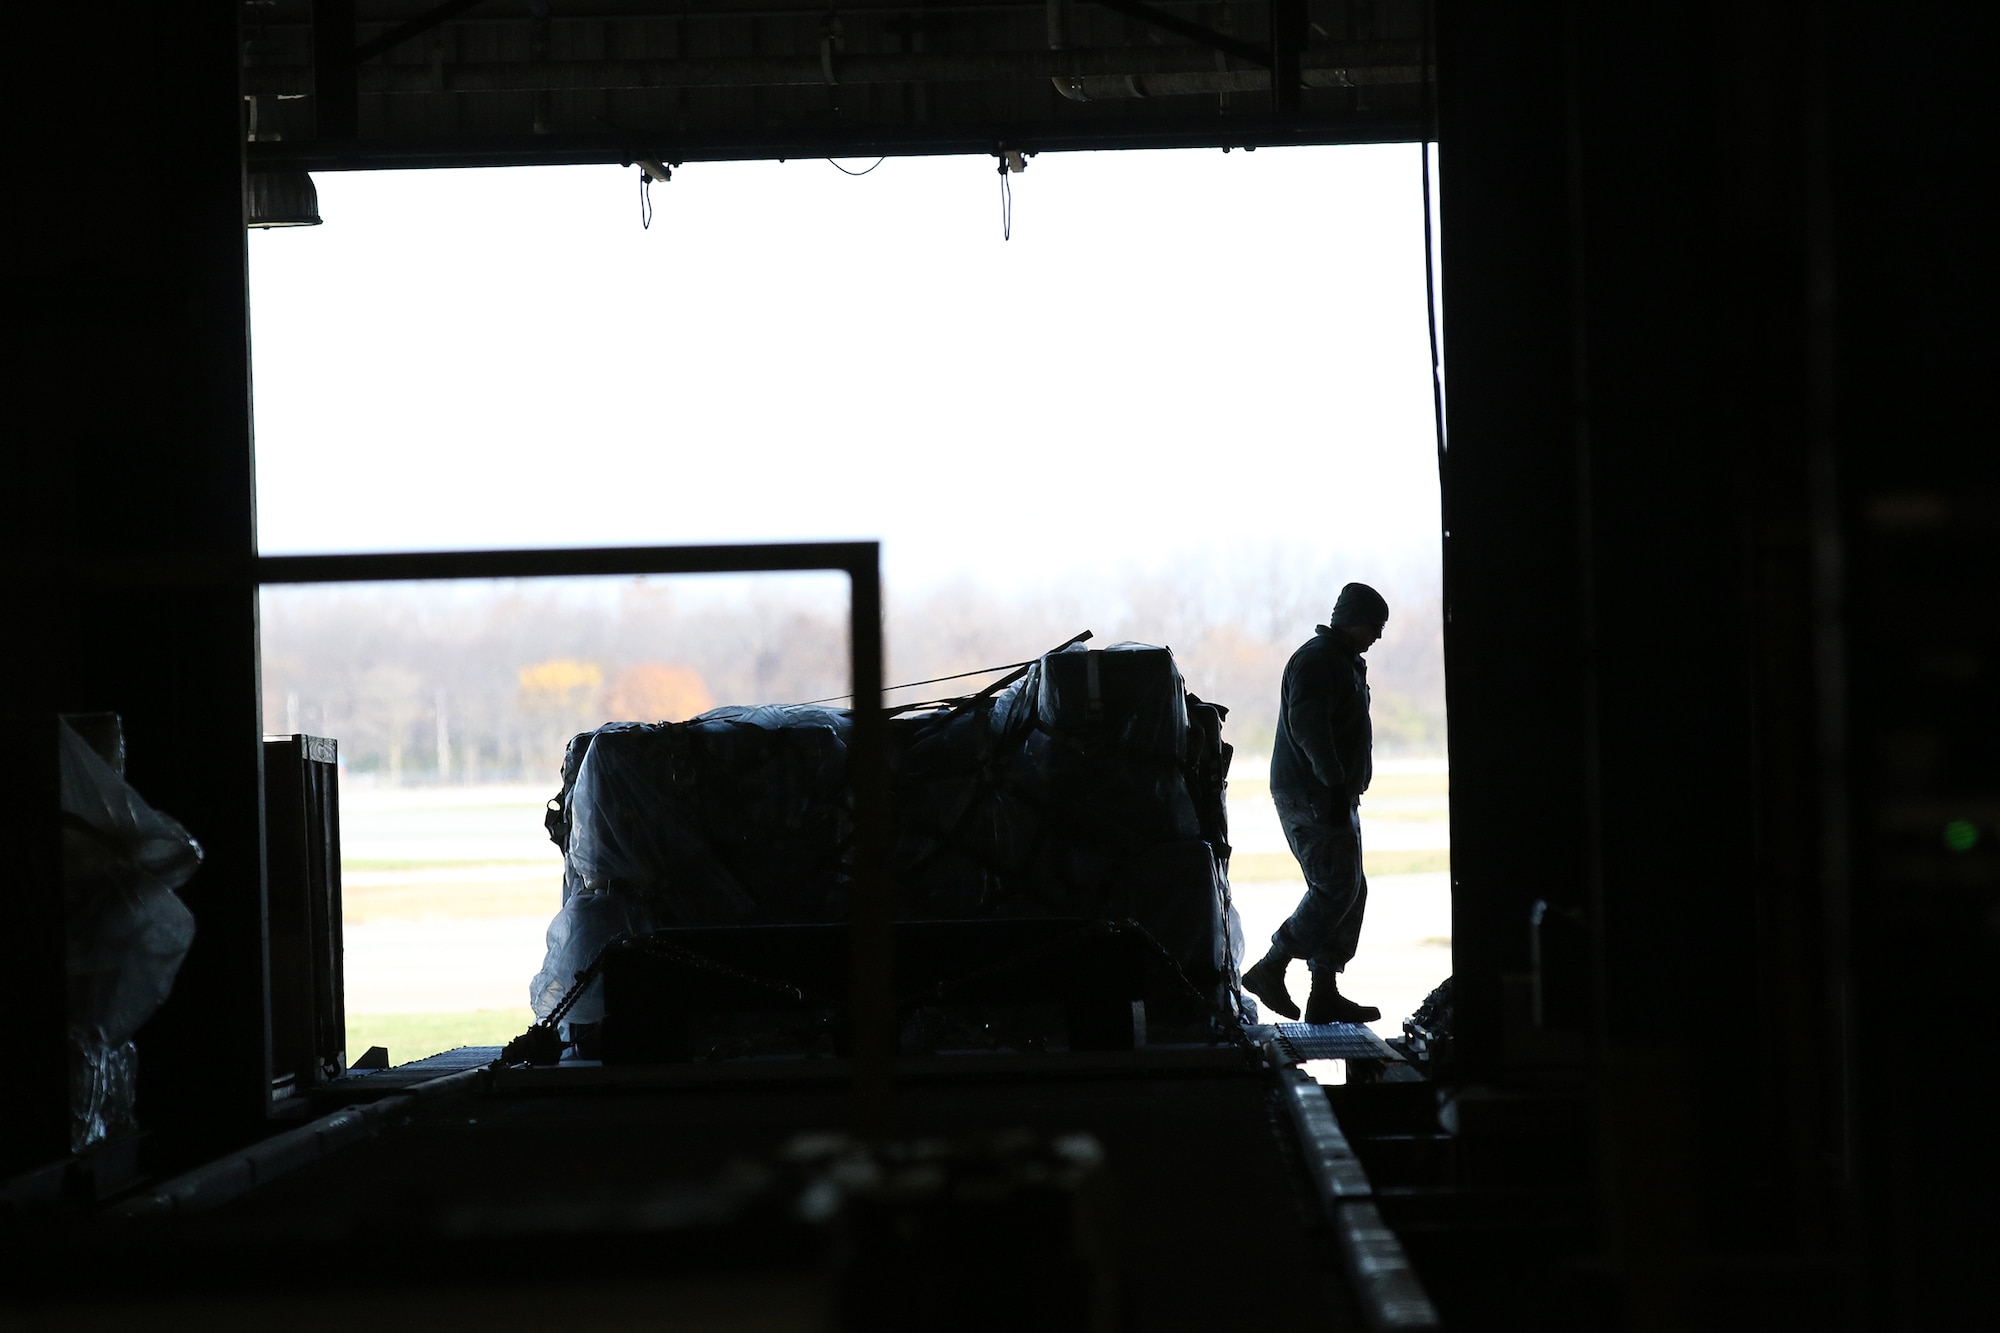 WRIGHT-PATTERSON AIR FORCE BASE, Ohio -  A lone 87th Aerial Port Squadron Airman,  walks away from a secured pallet waiting to be loaded and transportated by a  C-17 Globemaster III during training held on the Nov. 6, 2015 unit training assembly. (U.S. Air Force photo /Tech. Sgt. Patrick O’Reilly)